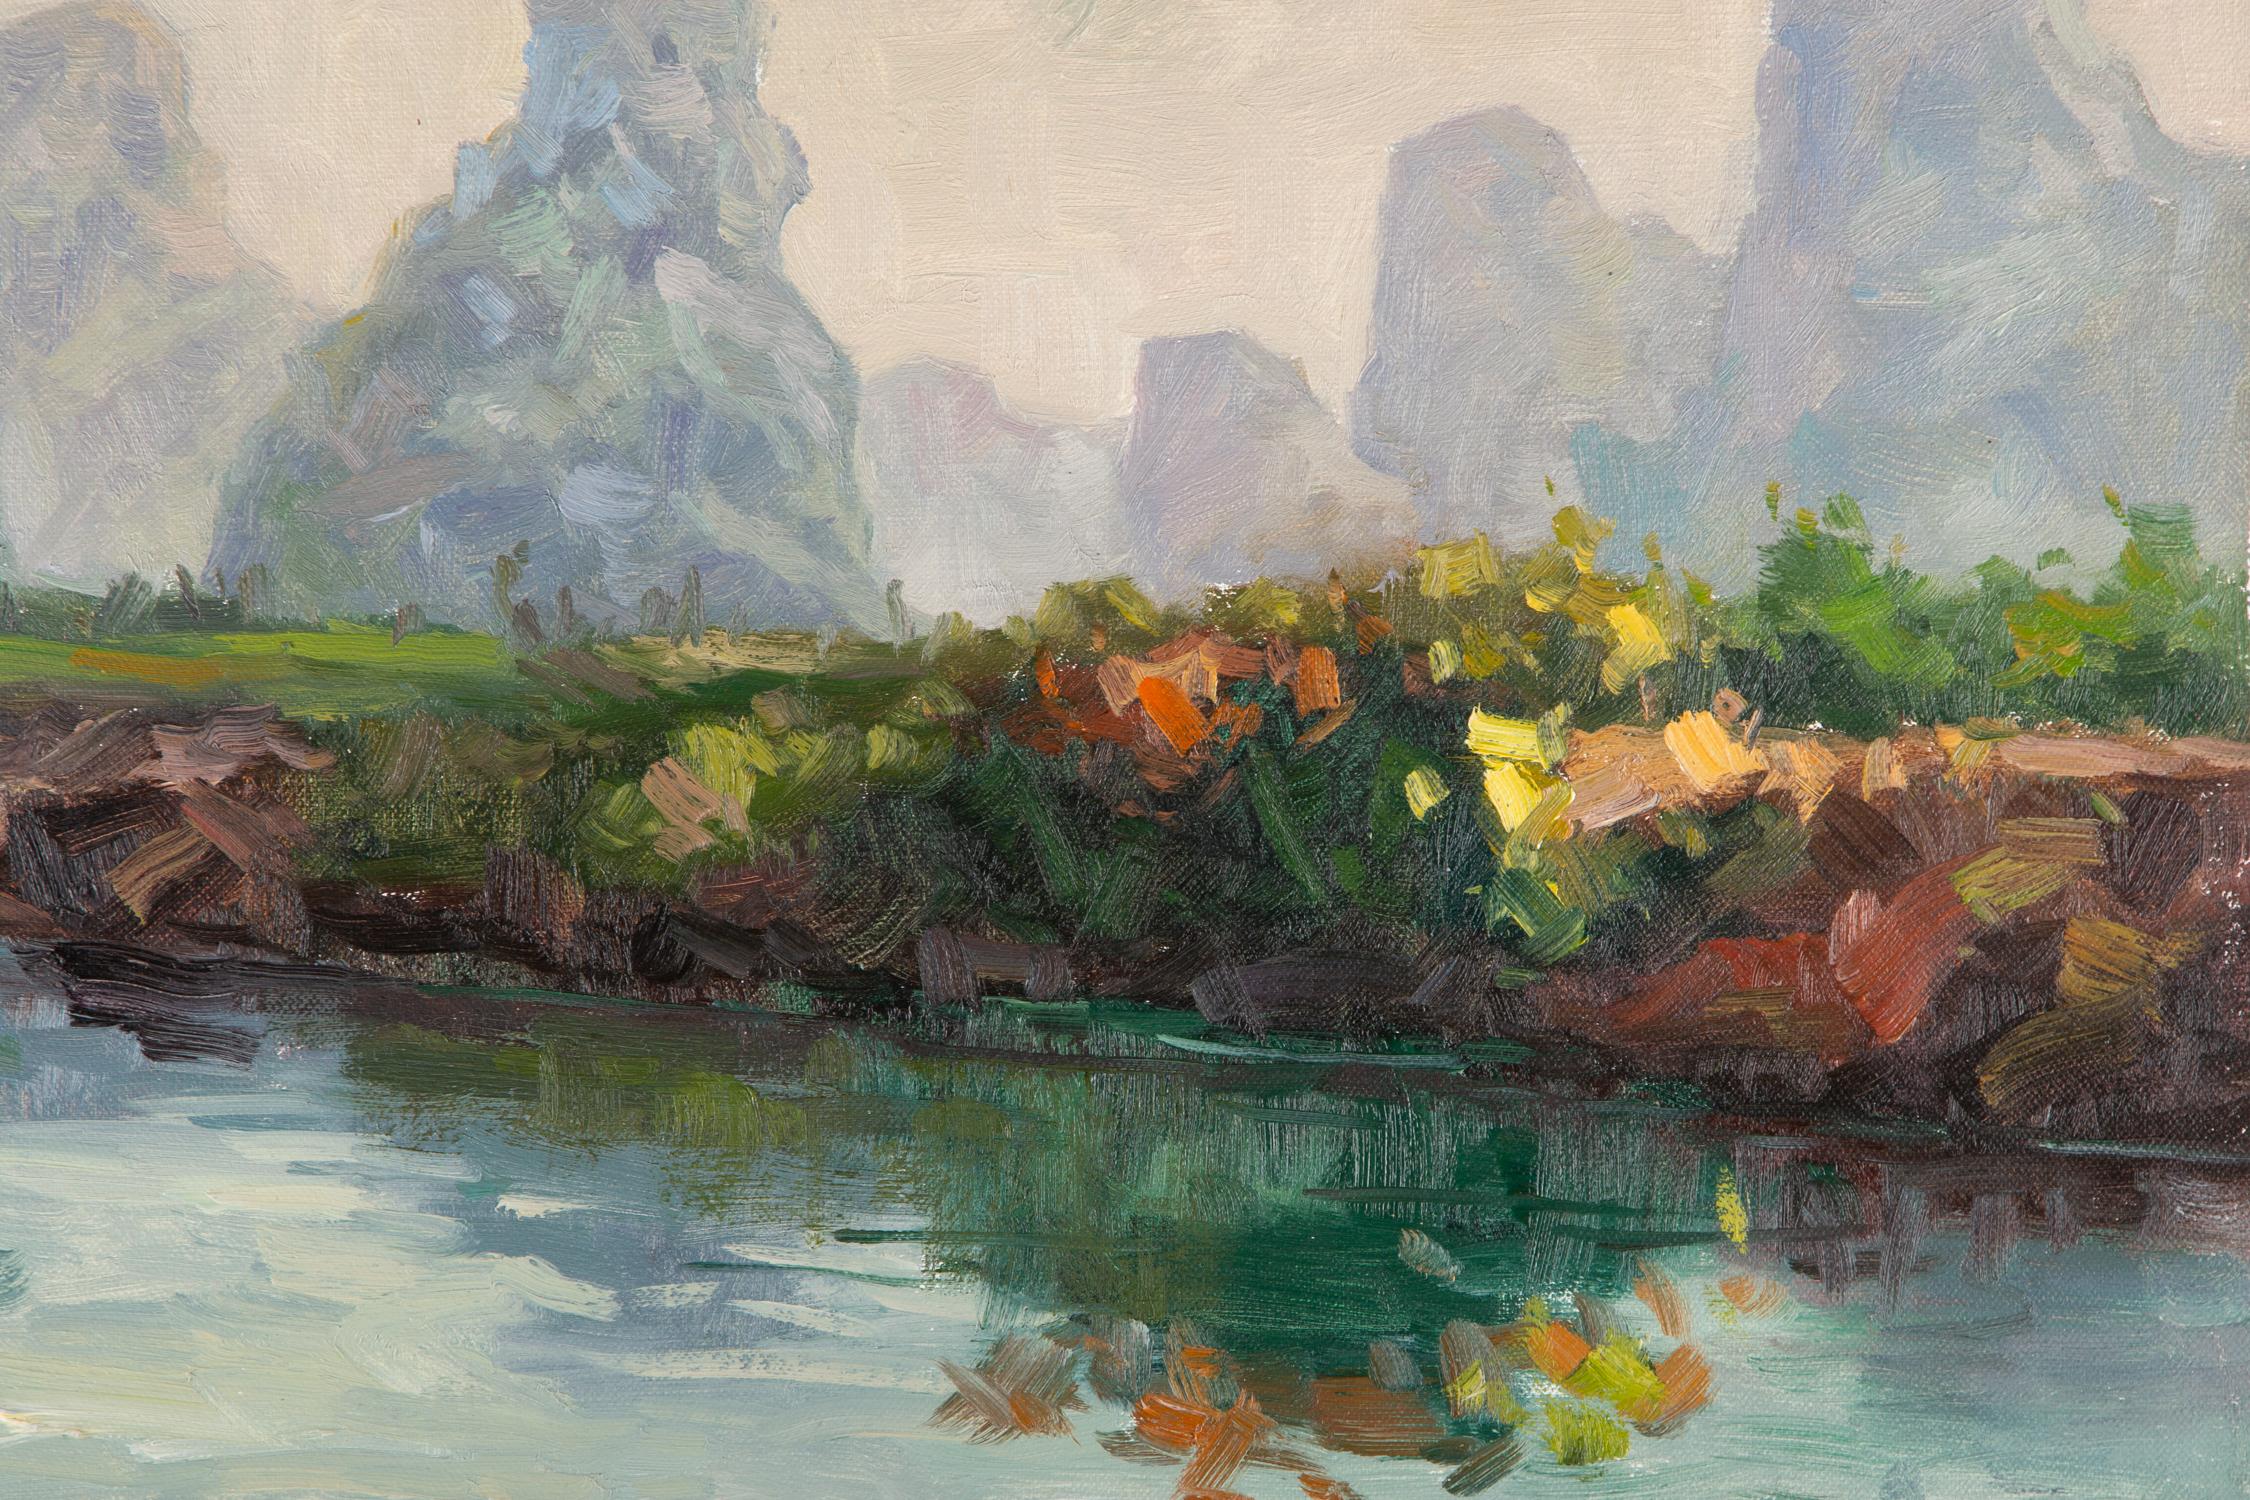  Title: Guilin Scenery 2
 Medium: Oil on canvas
 Size: 27.5 x 19.5inches
 Frame: Framing options available!
 Age: 2000s
 Condition: Painting appears to be in excellent condition.
 Note: This painting is unstretched
 Artist: Hualin Li
 Provenance: